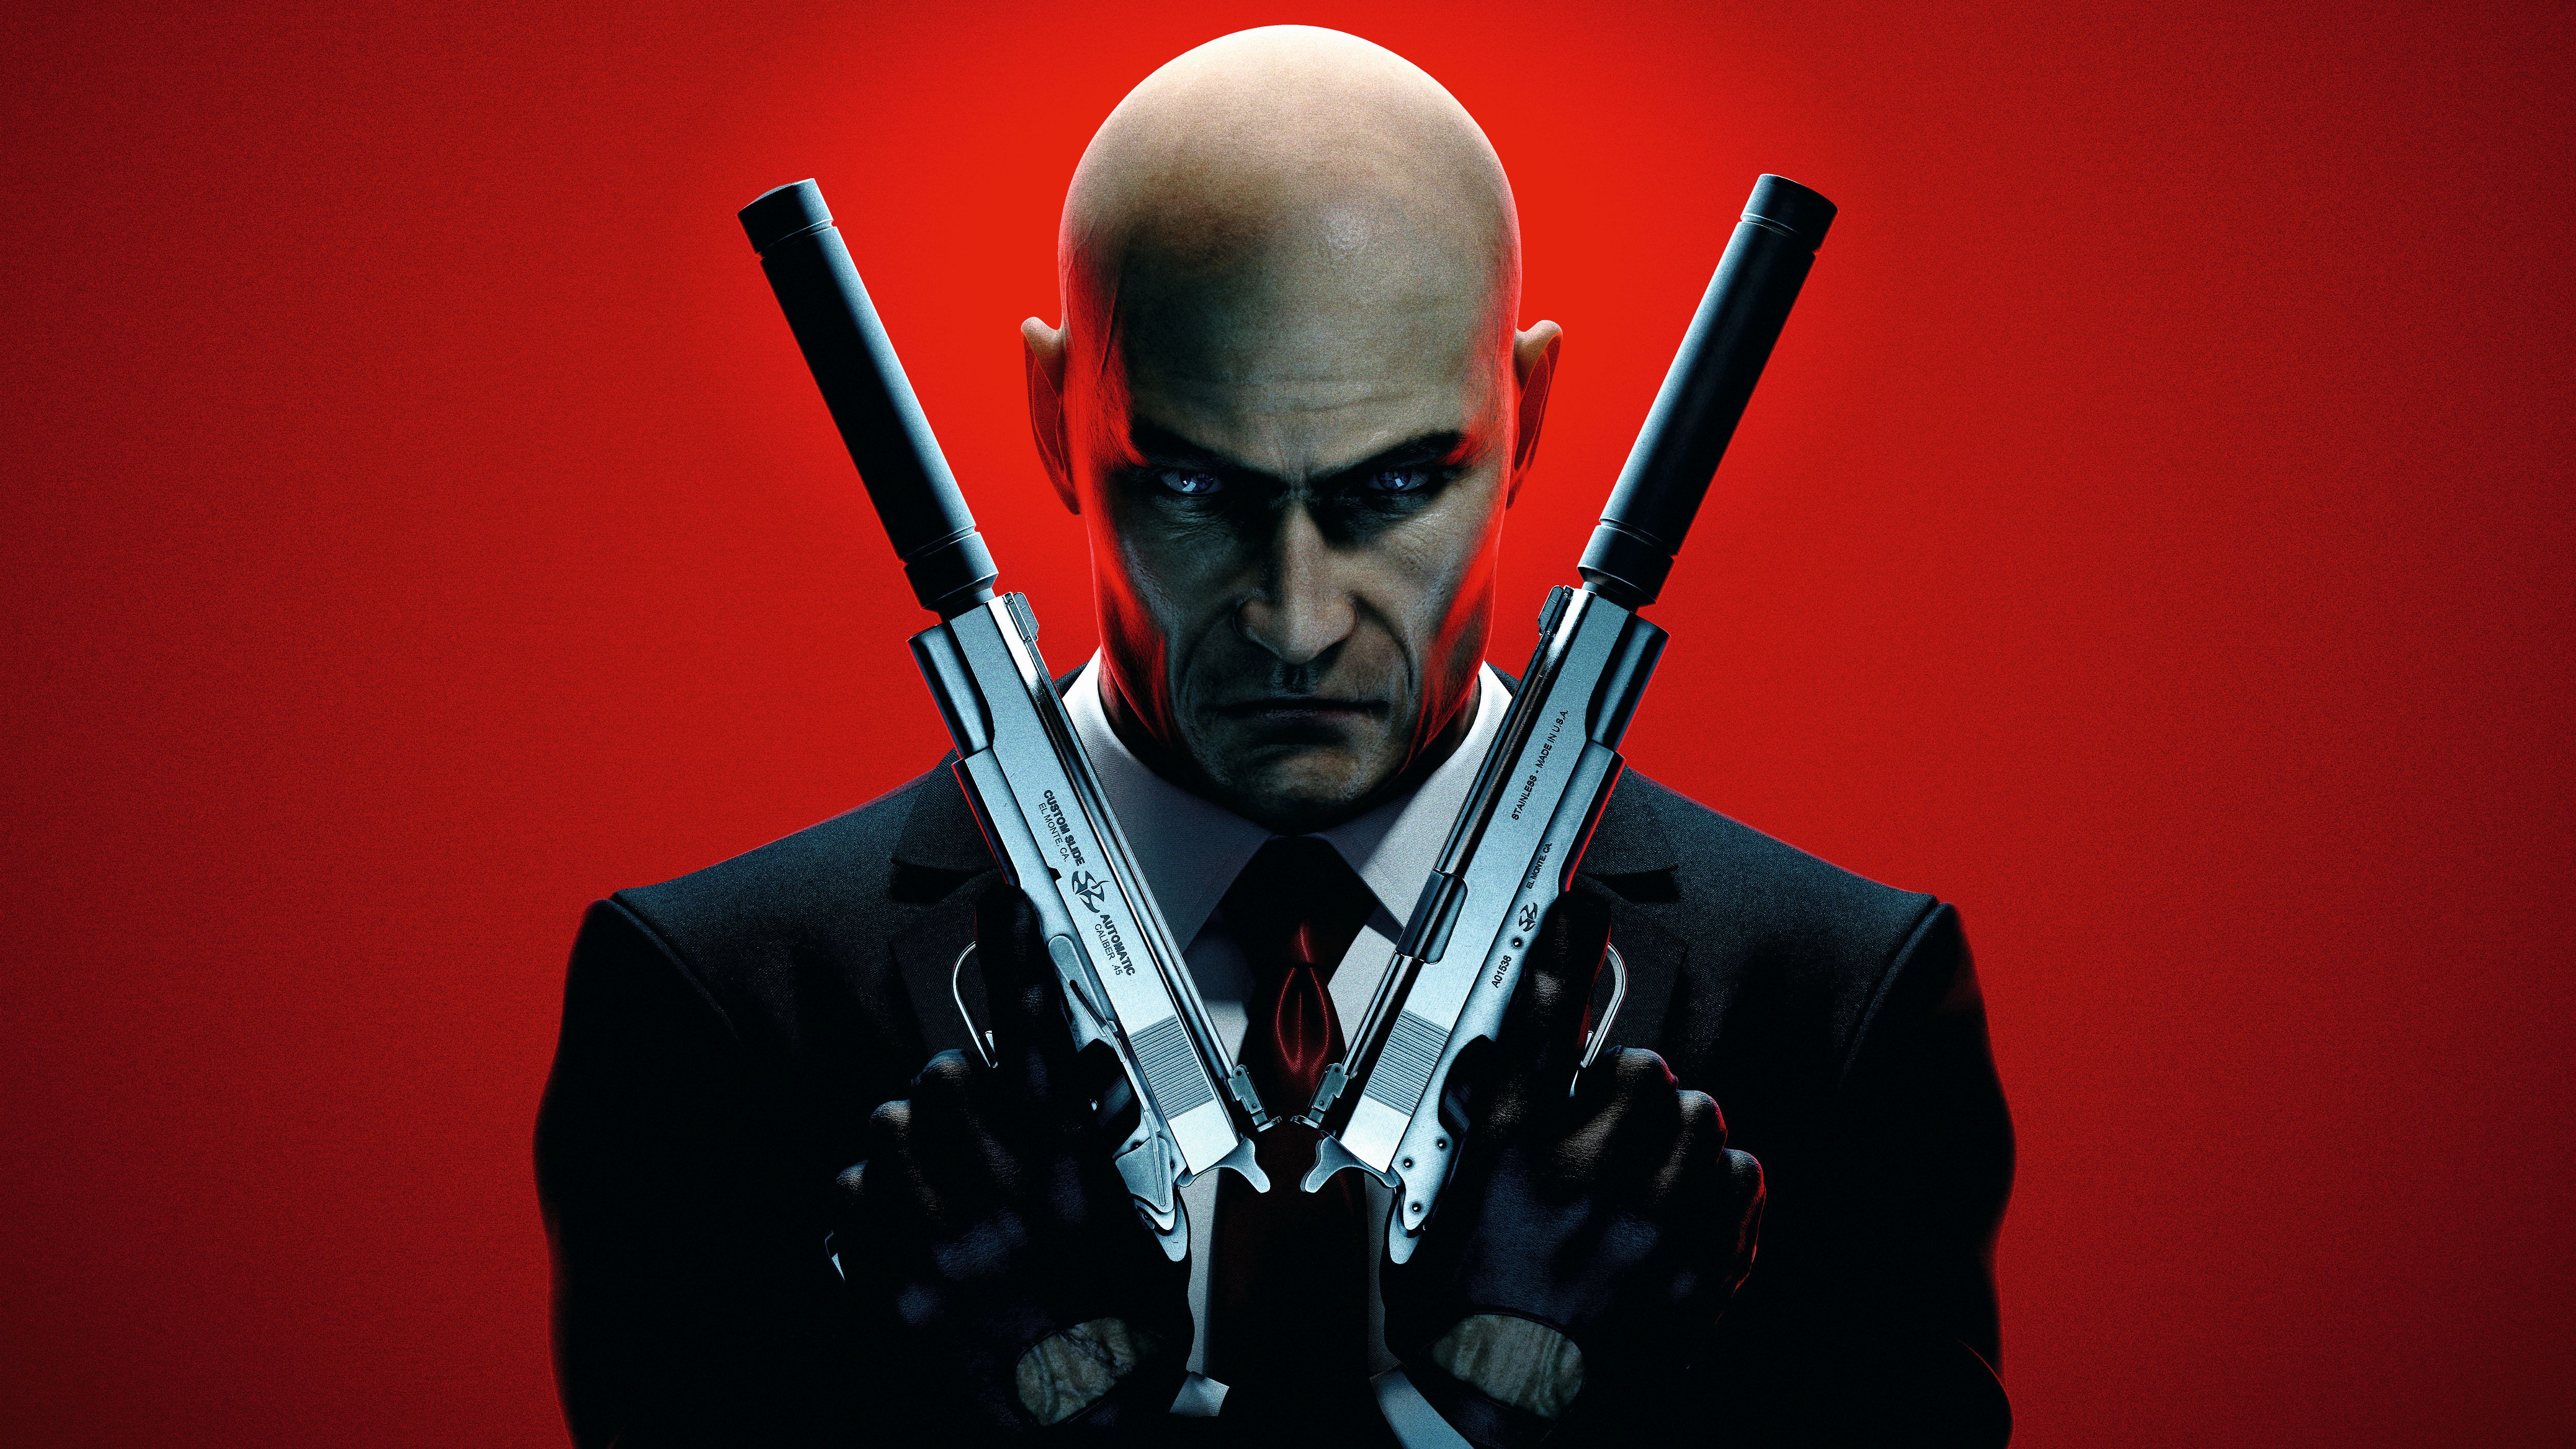 Red Background Hitman Hitman Absolution Black Suit White Shirt Red Tie 5000x2812